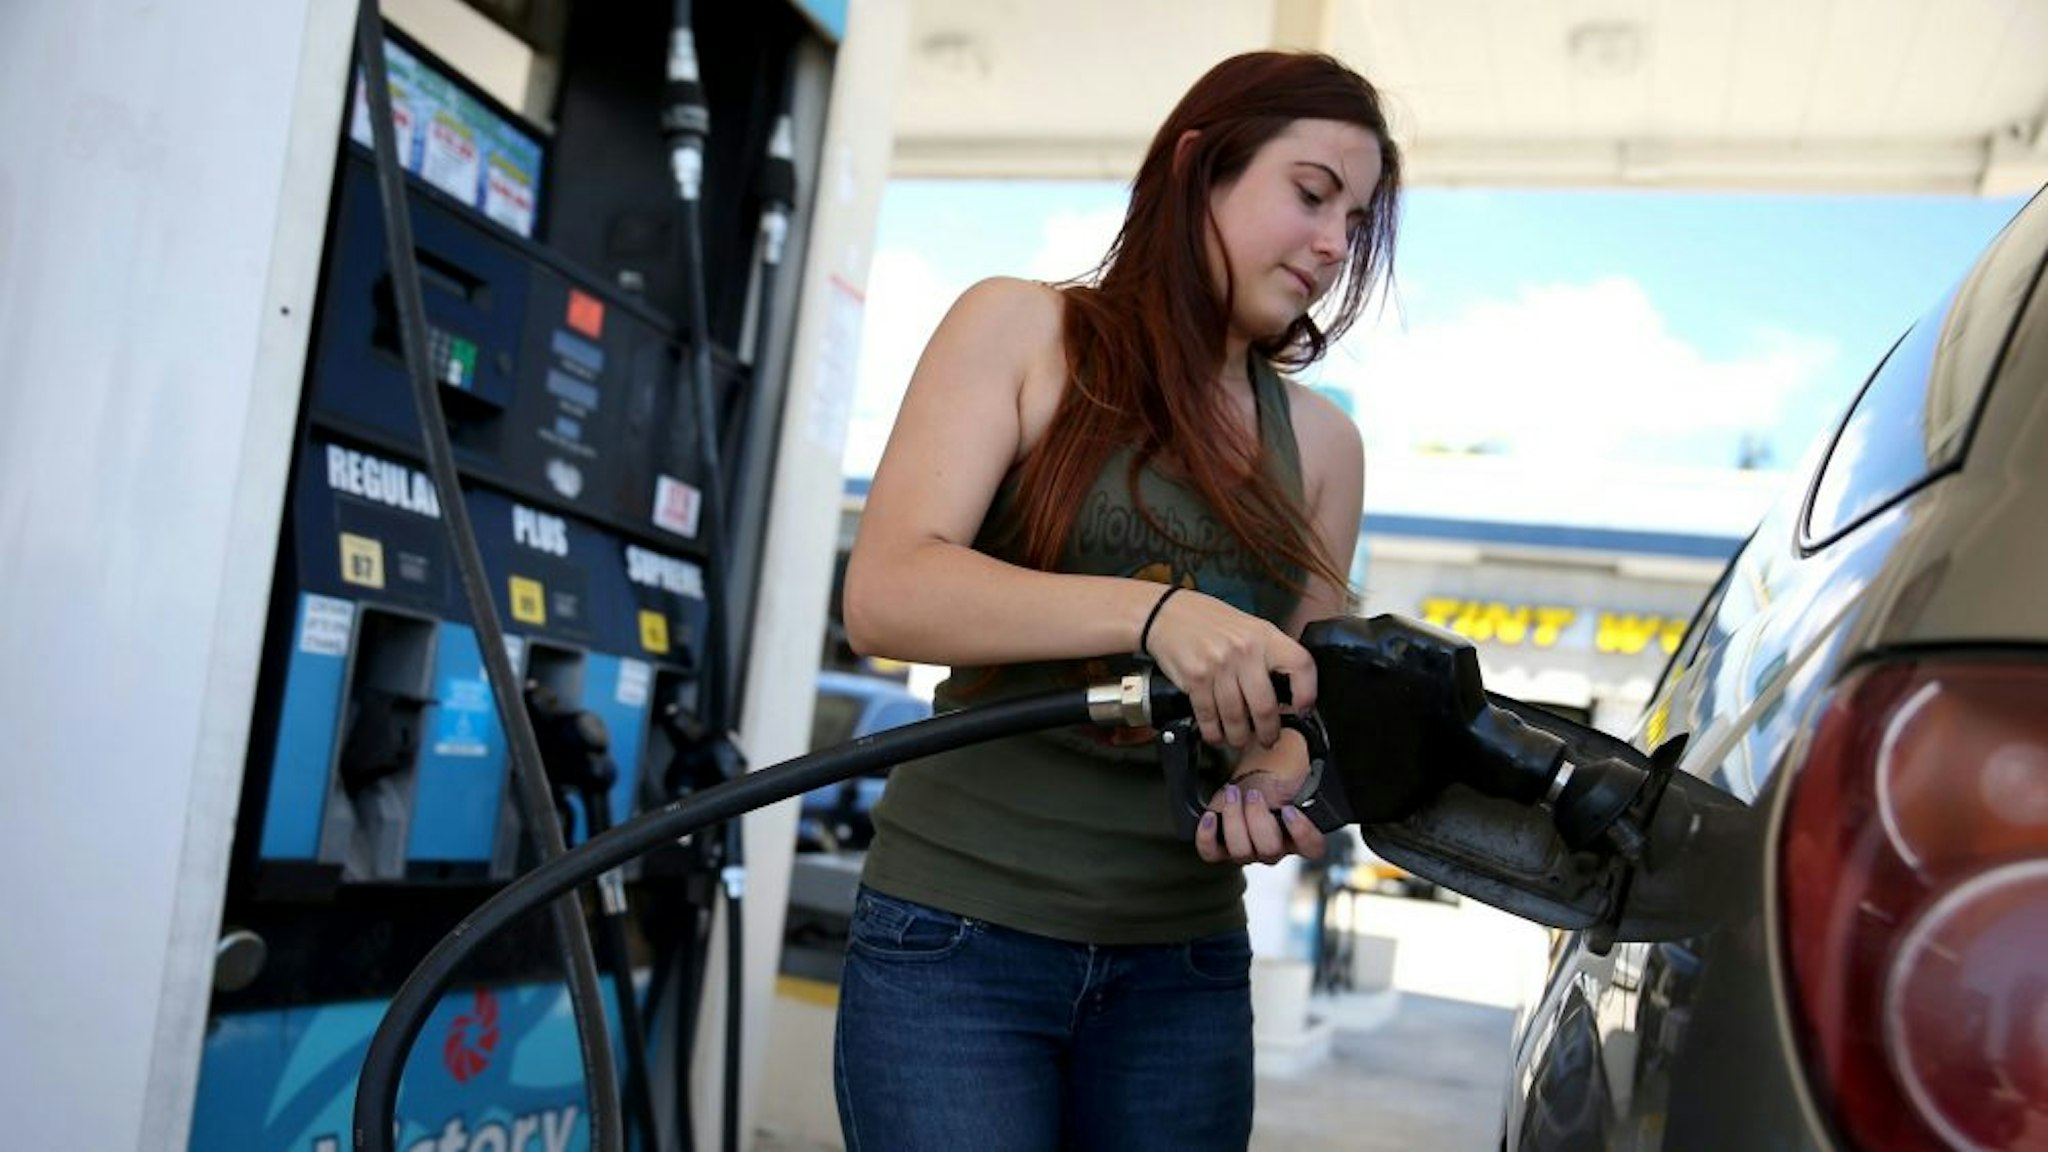 PEMBROKE PINES, FL - APRIL 21: Gabrielle Smith pumps gas at the Victory gas station on April 21, 2014 in Pembroke Pines, Florida. According to the Lundberg Survey the average price for a gallon of regular gas is now $3.69- the highest price since March of last year.